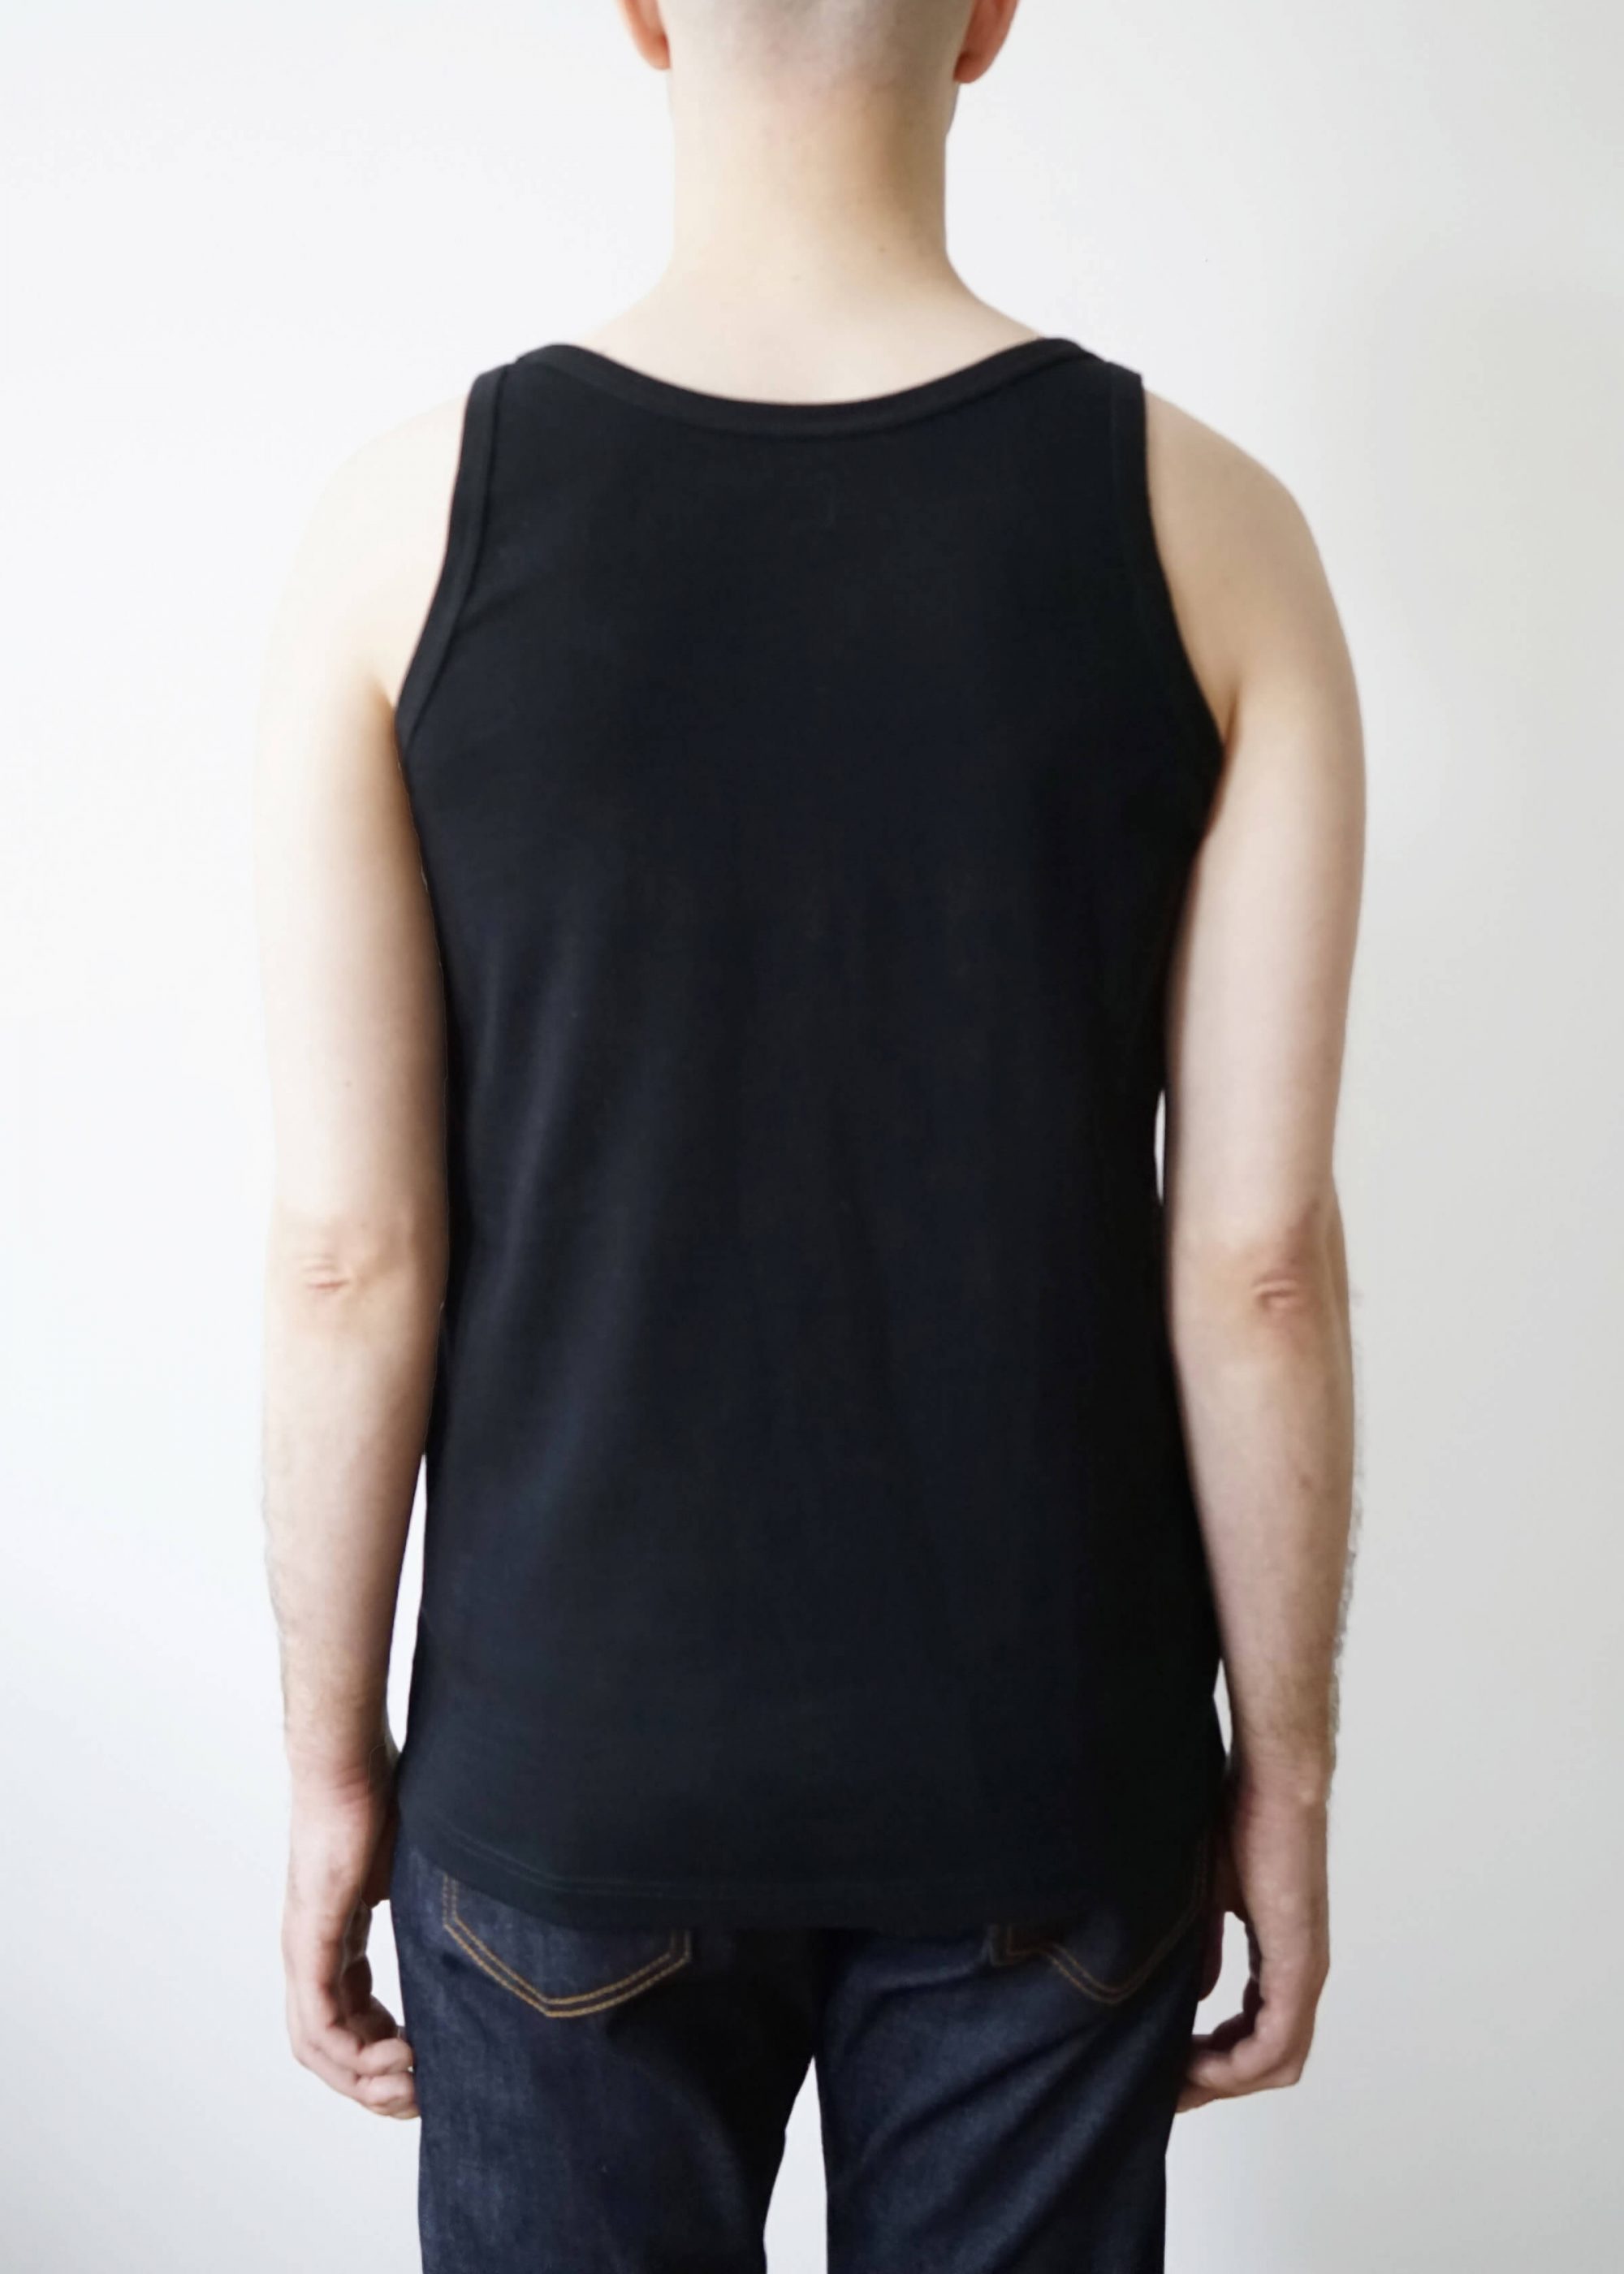 Product image for »Rothko« Black Organic Cotton Tank Top